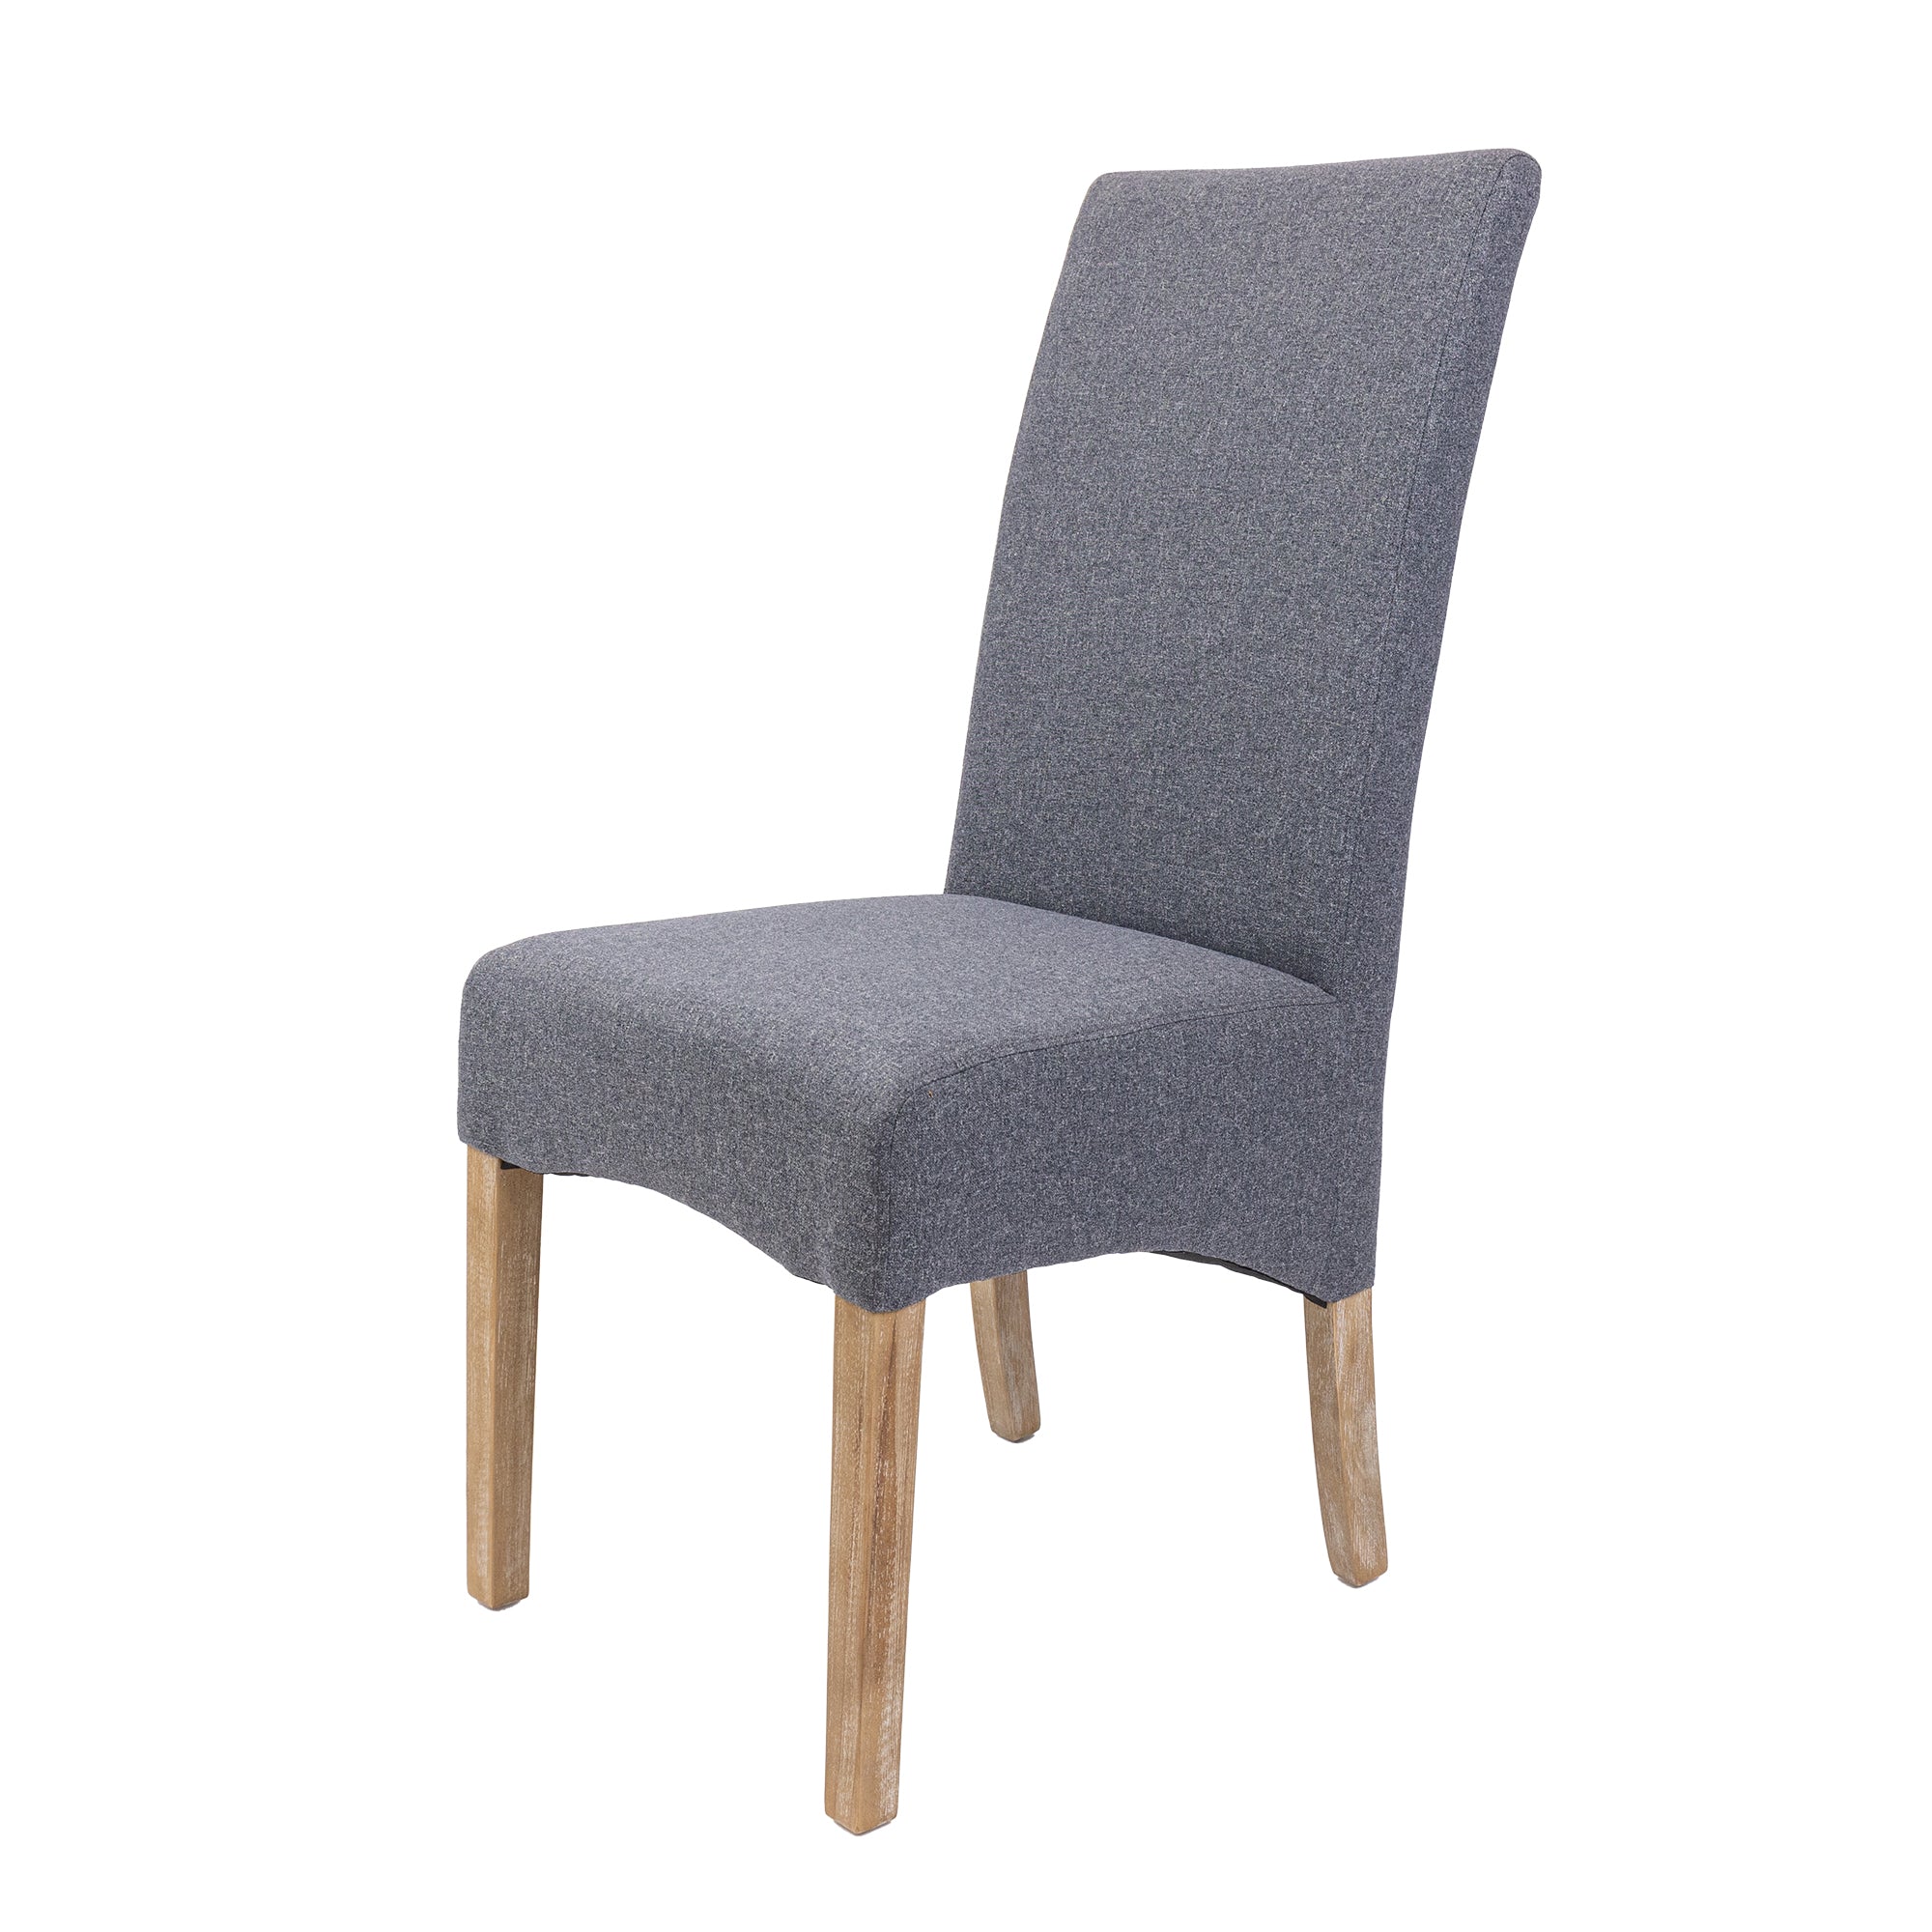 Set of 6 Grey Fabric Dining Chairs, Rubberwood Legs